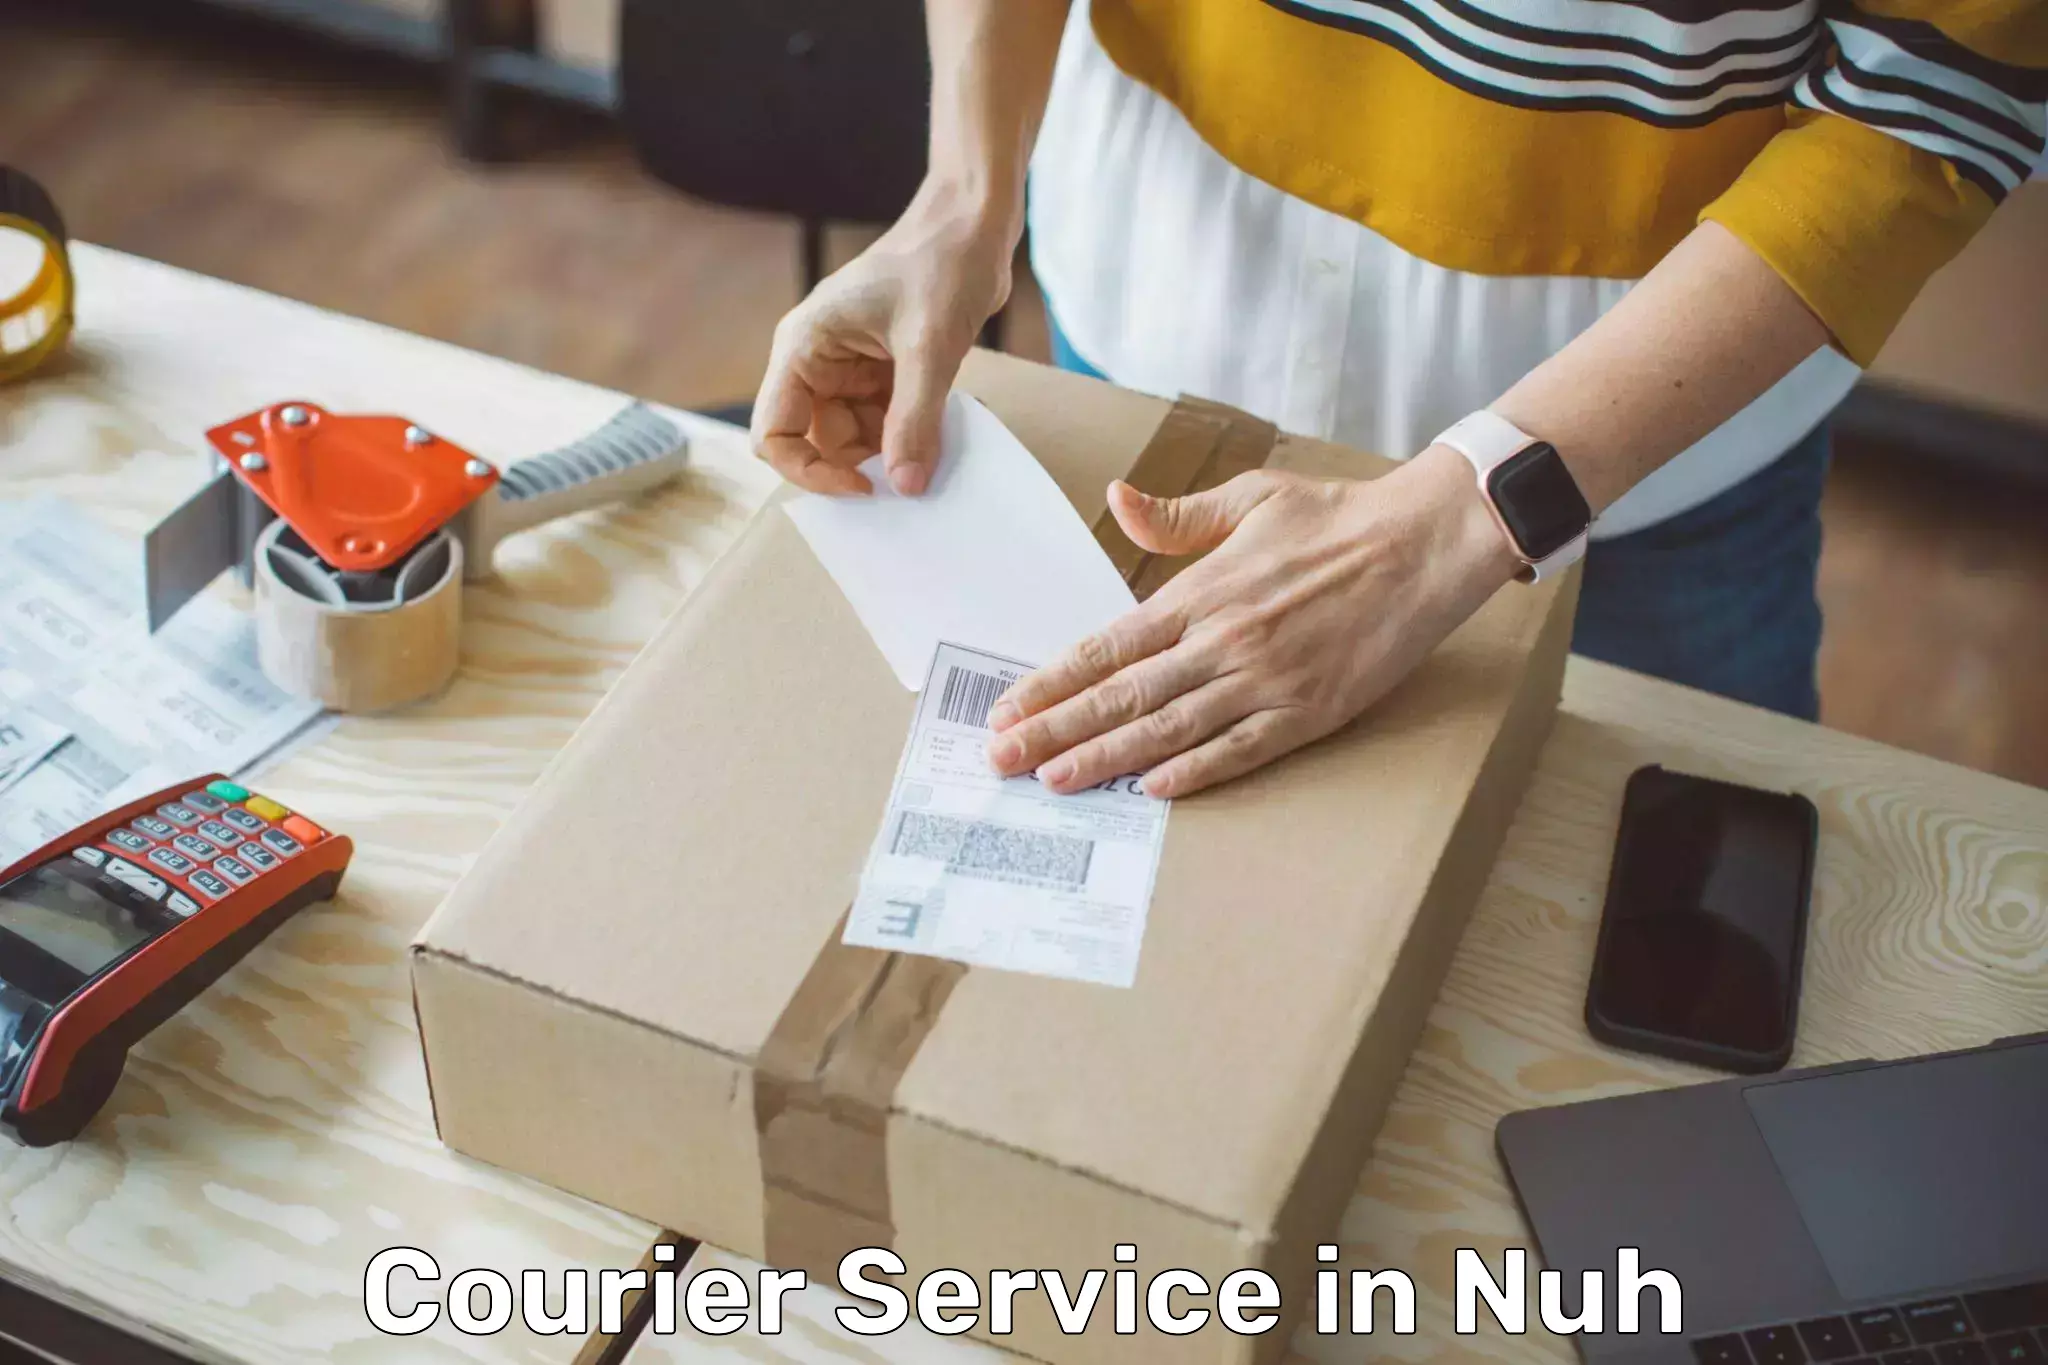 Customer-friendly courier services in Nuh